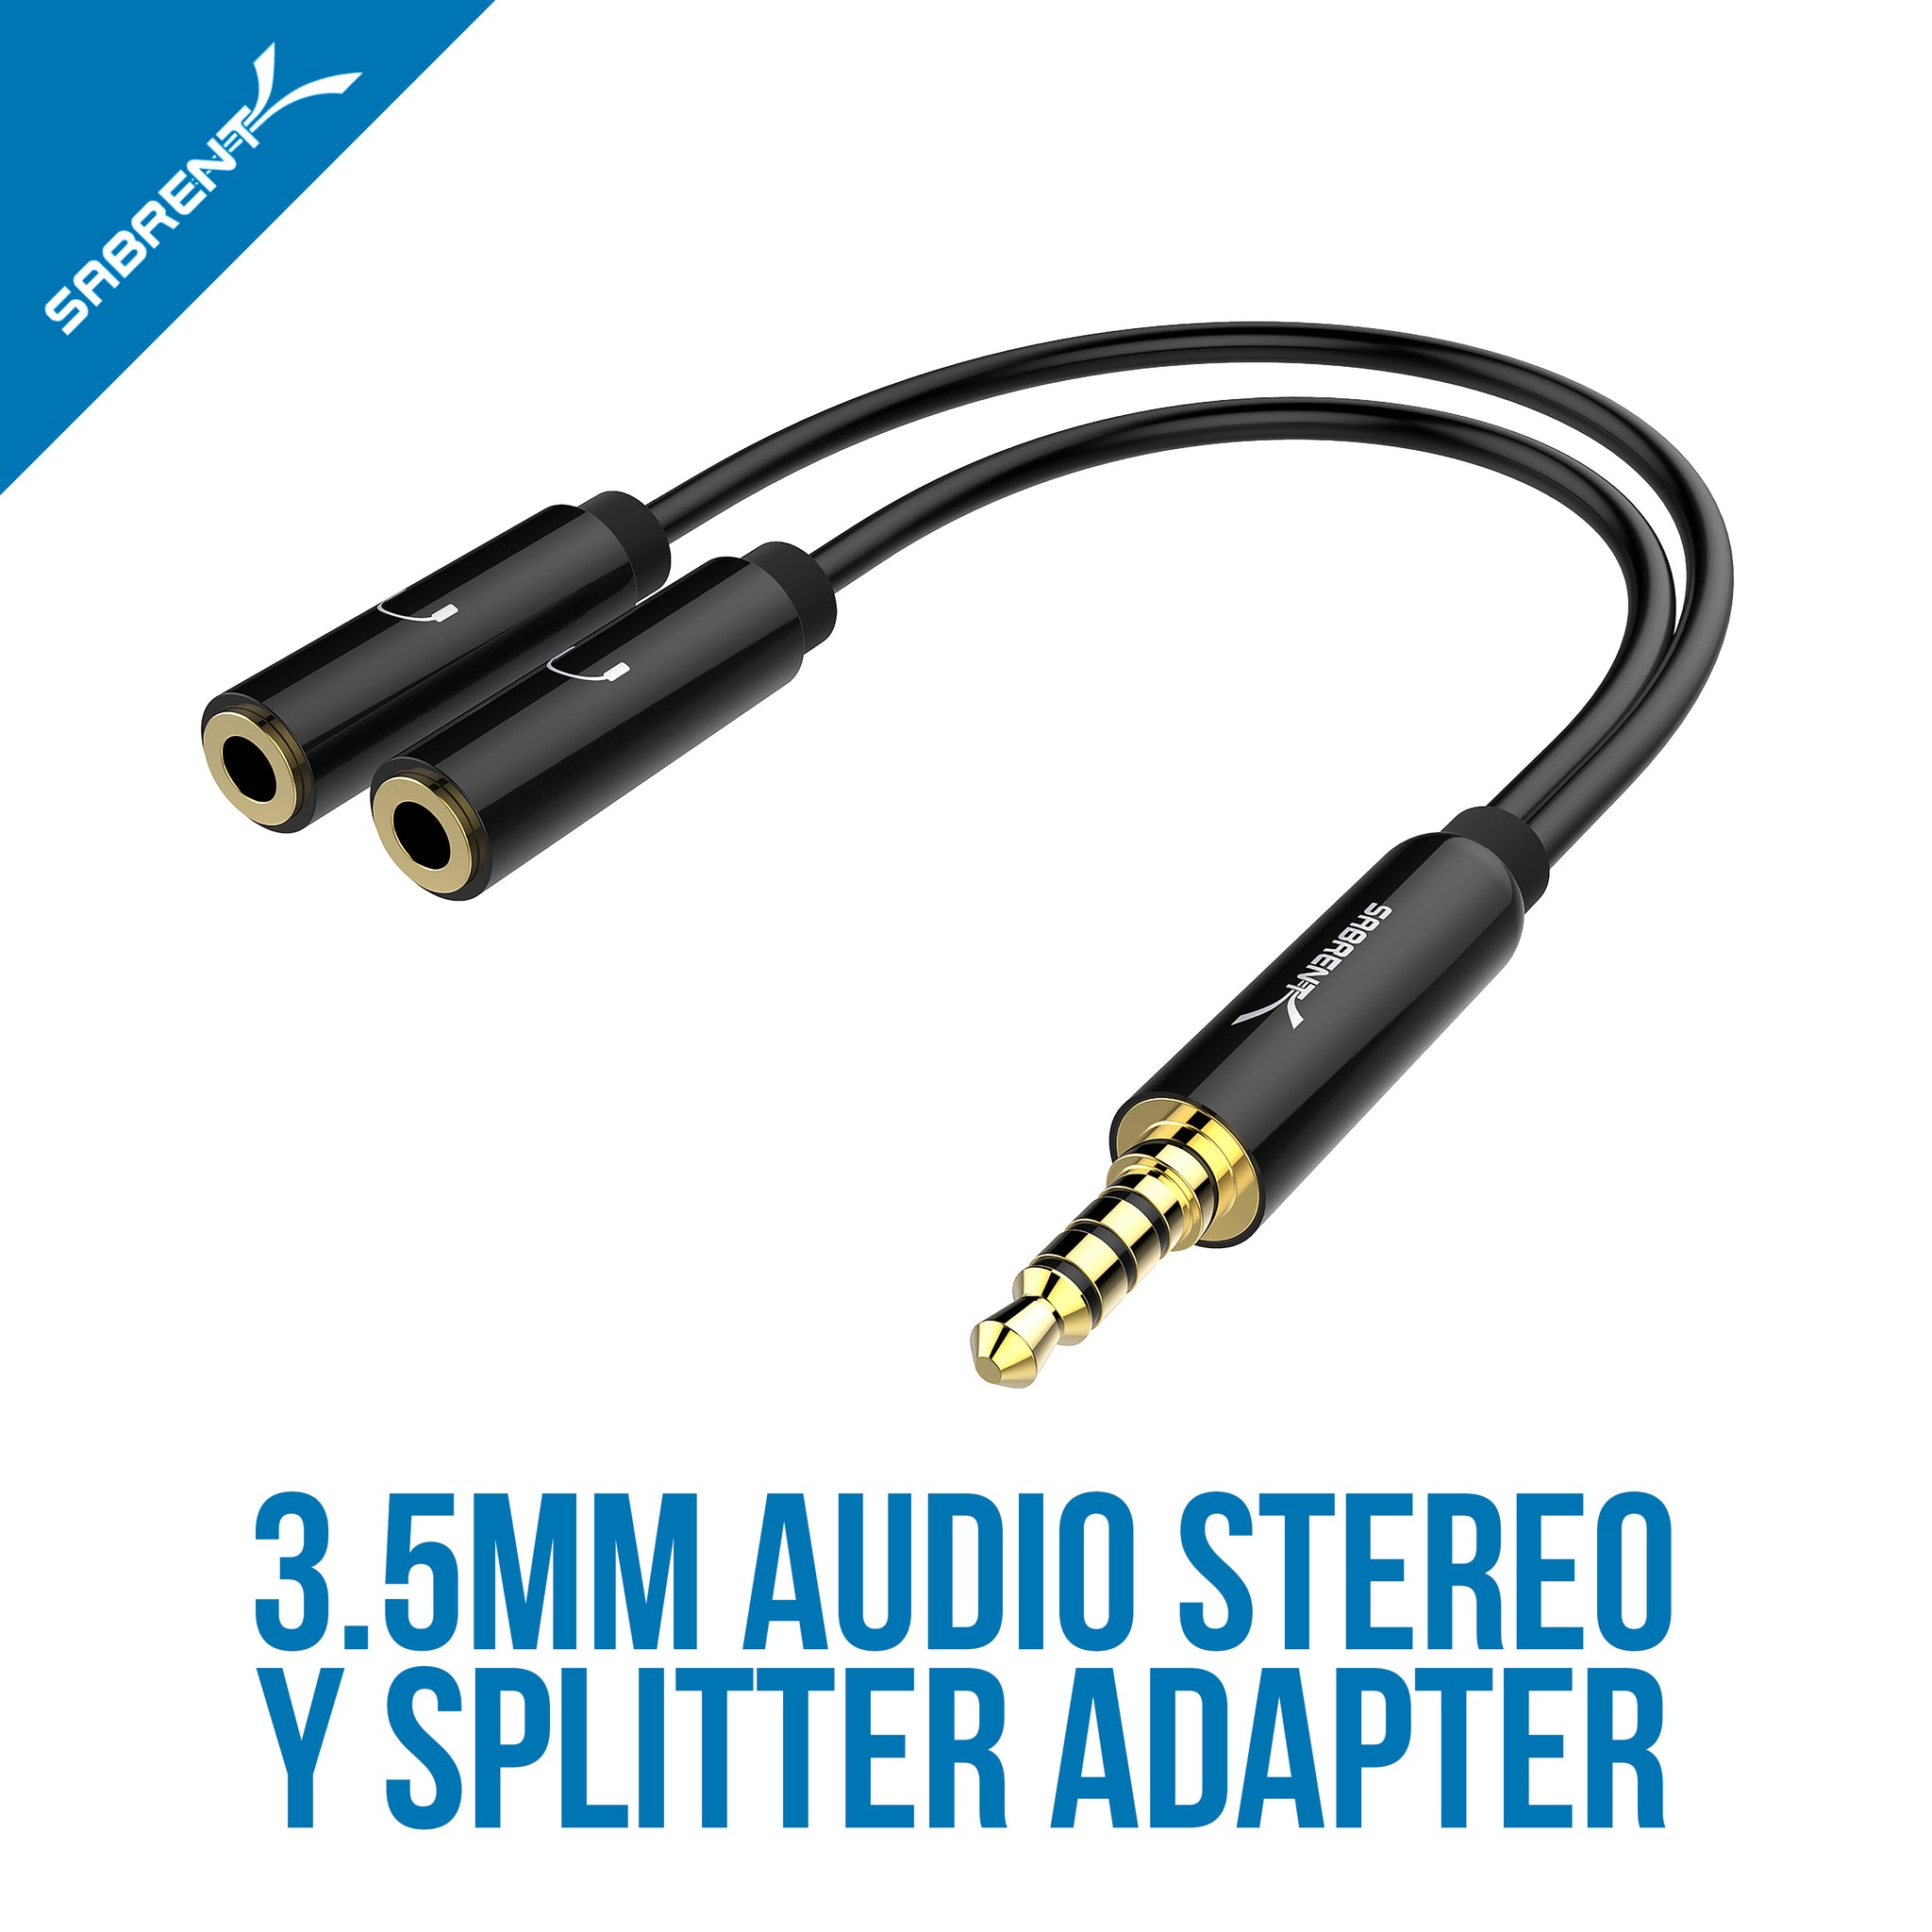 USB to 2 X 3.5mm Audio Stereo Splitter - Sabrent